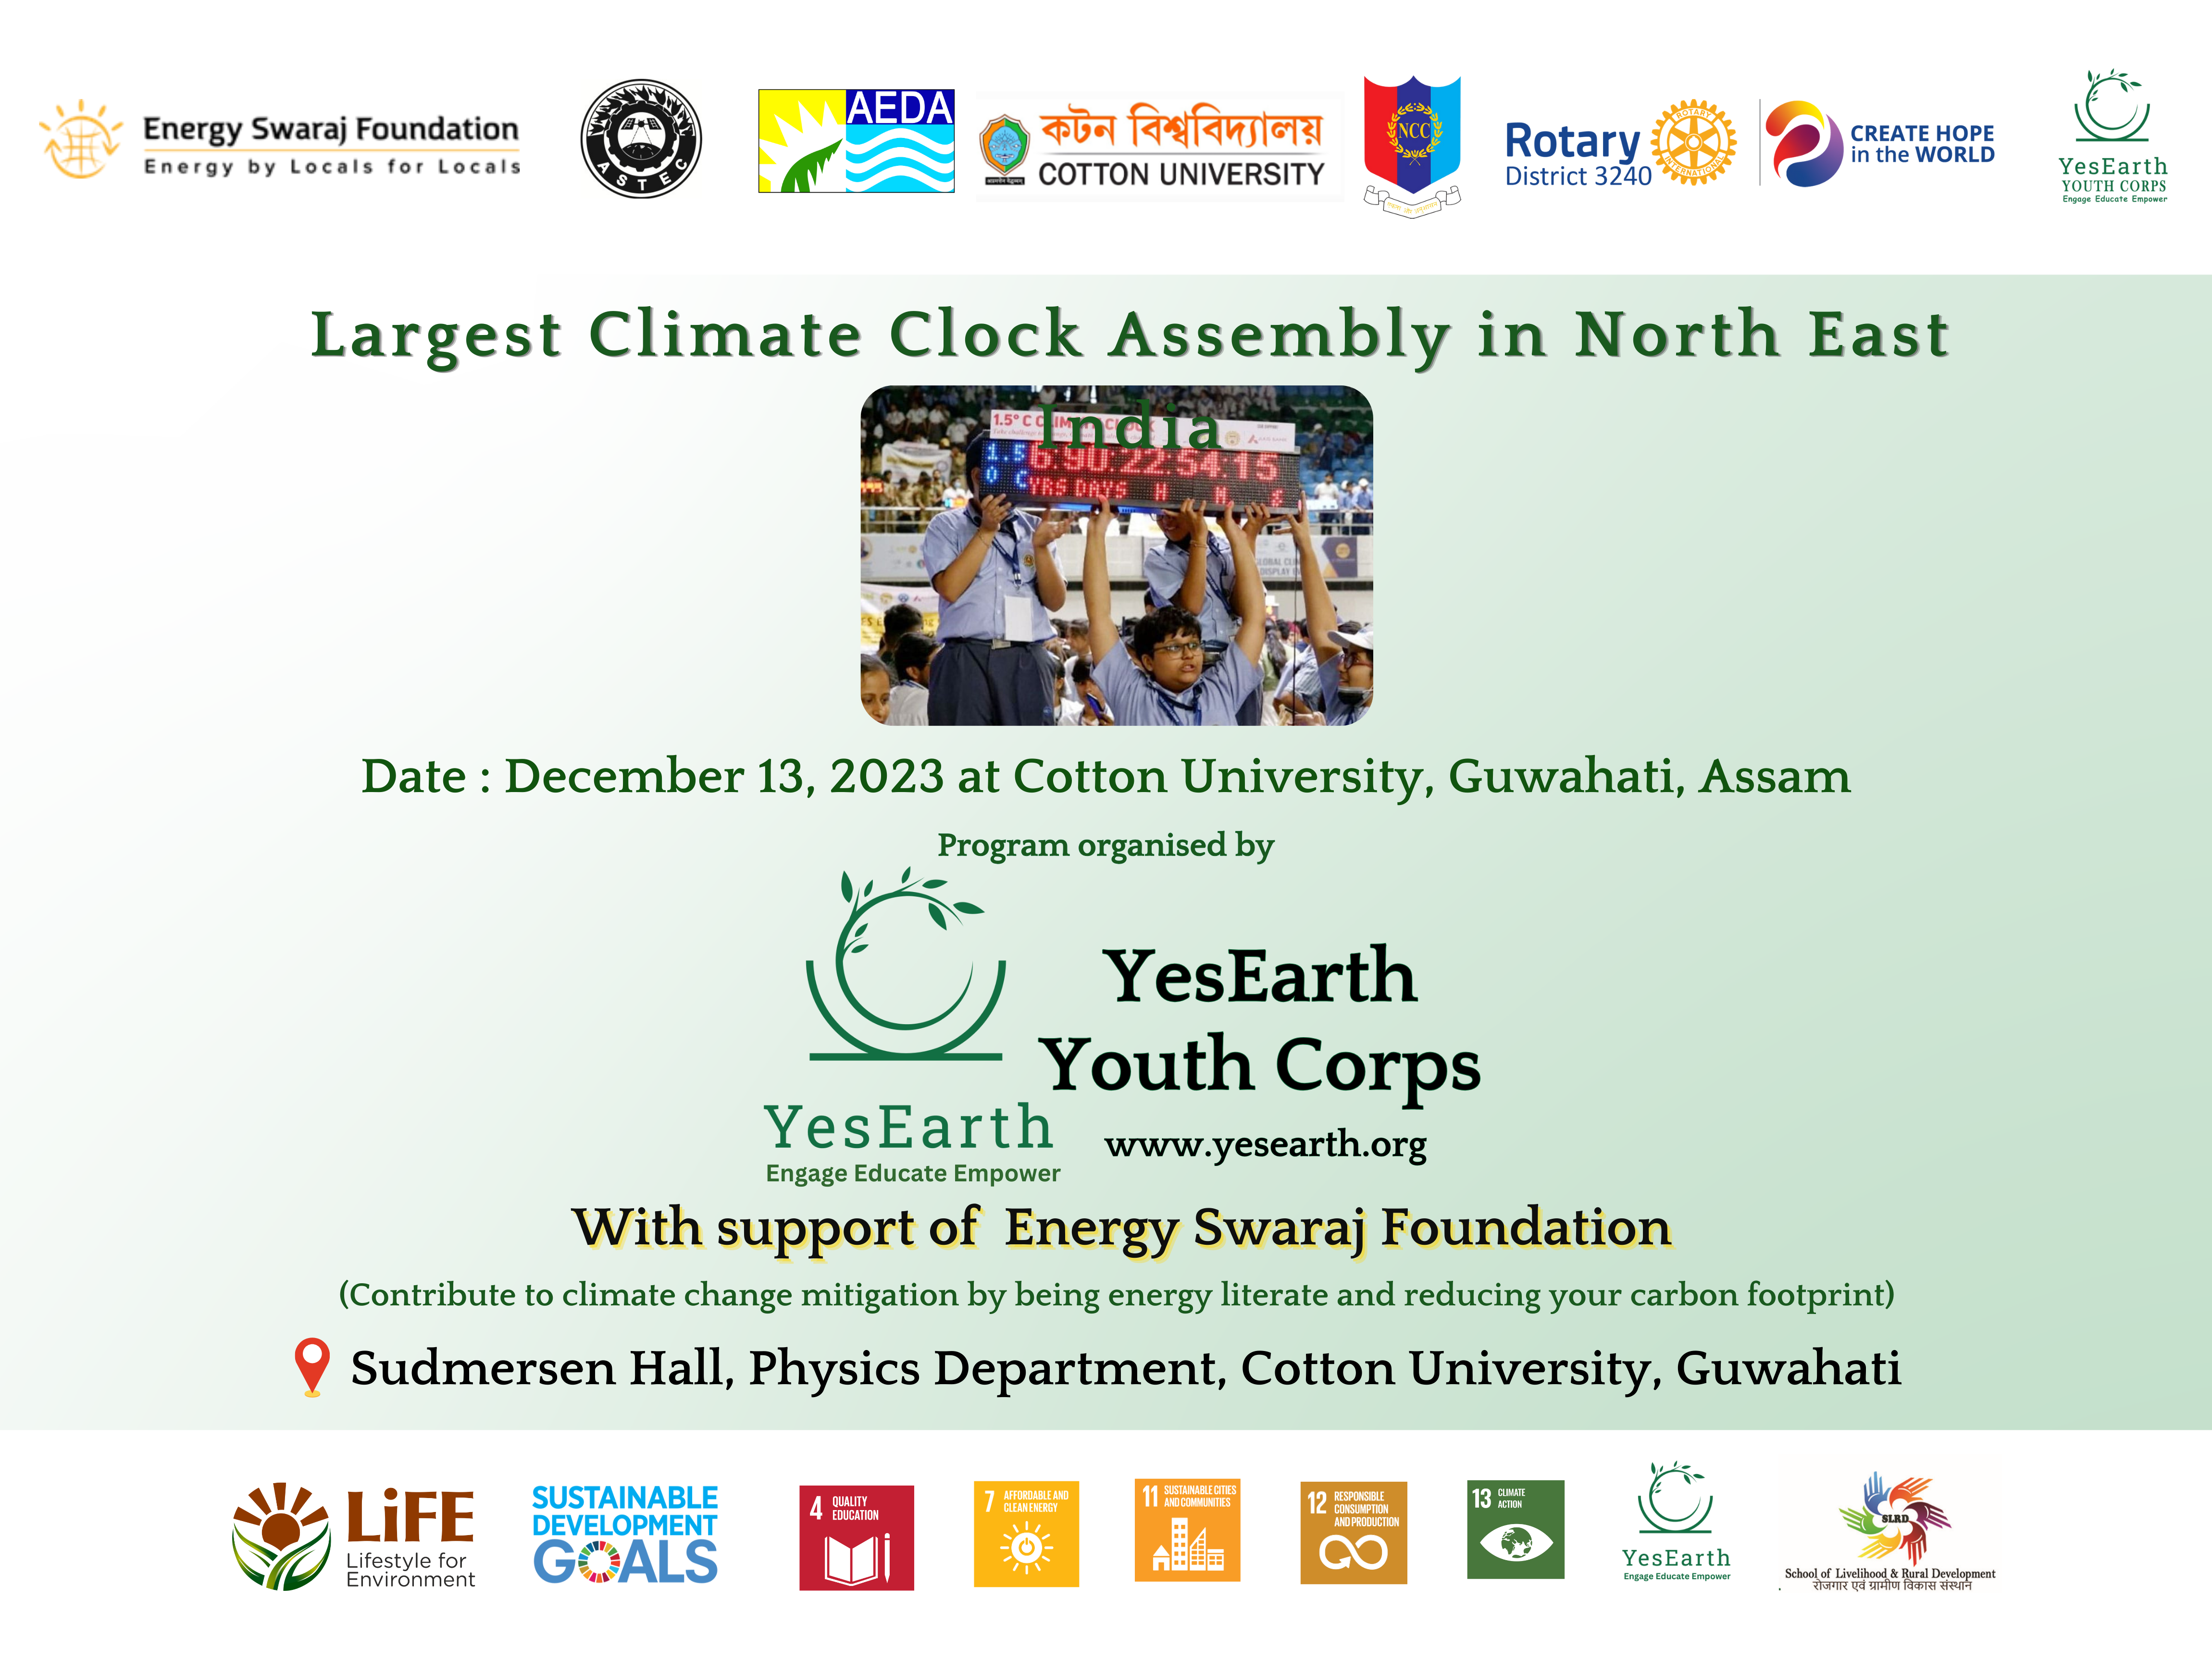 Largest Climate Clock Assembly Event in Northeast India